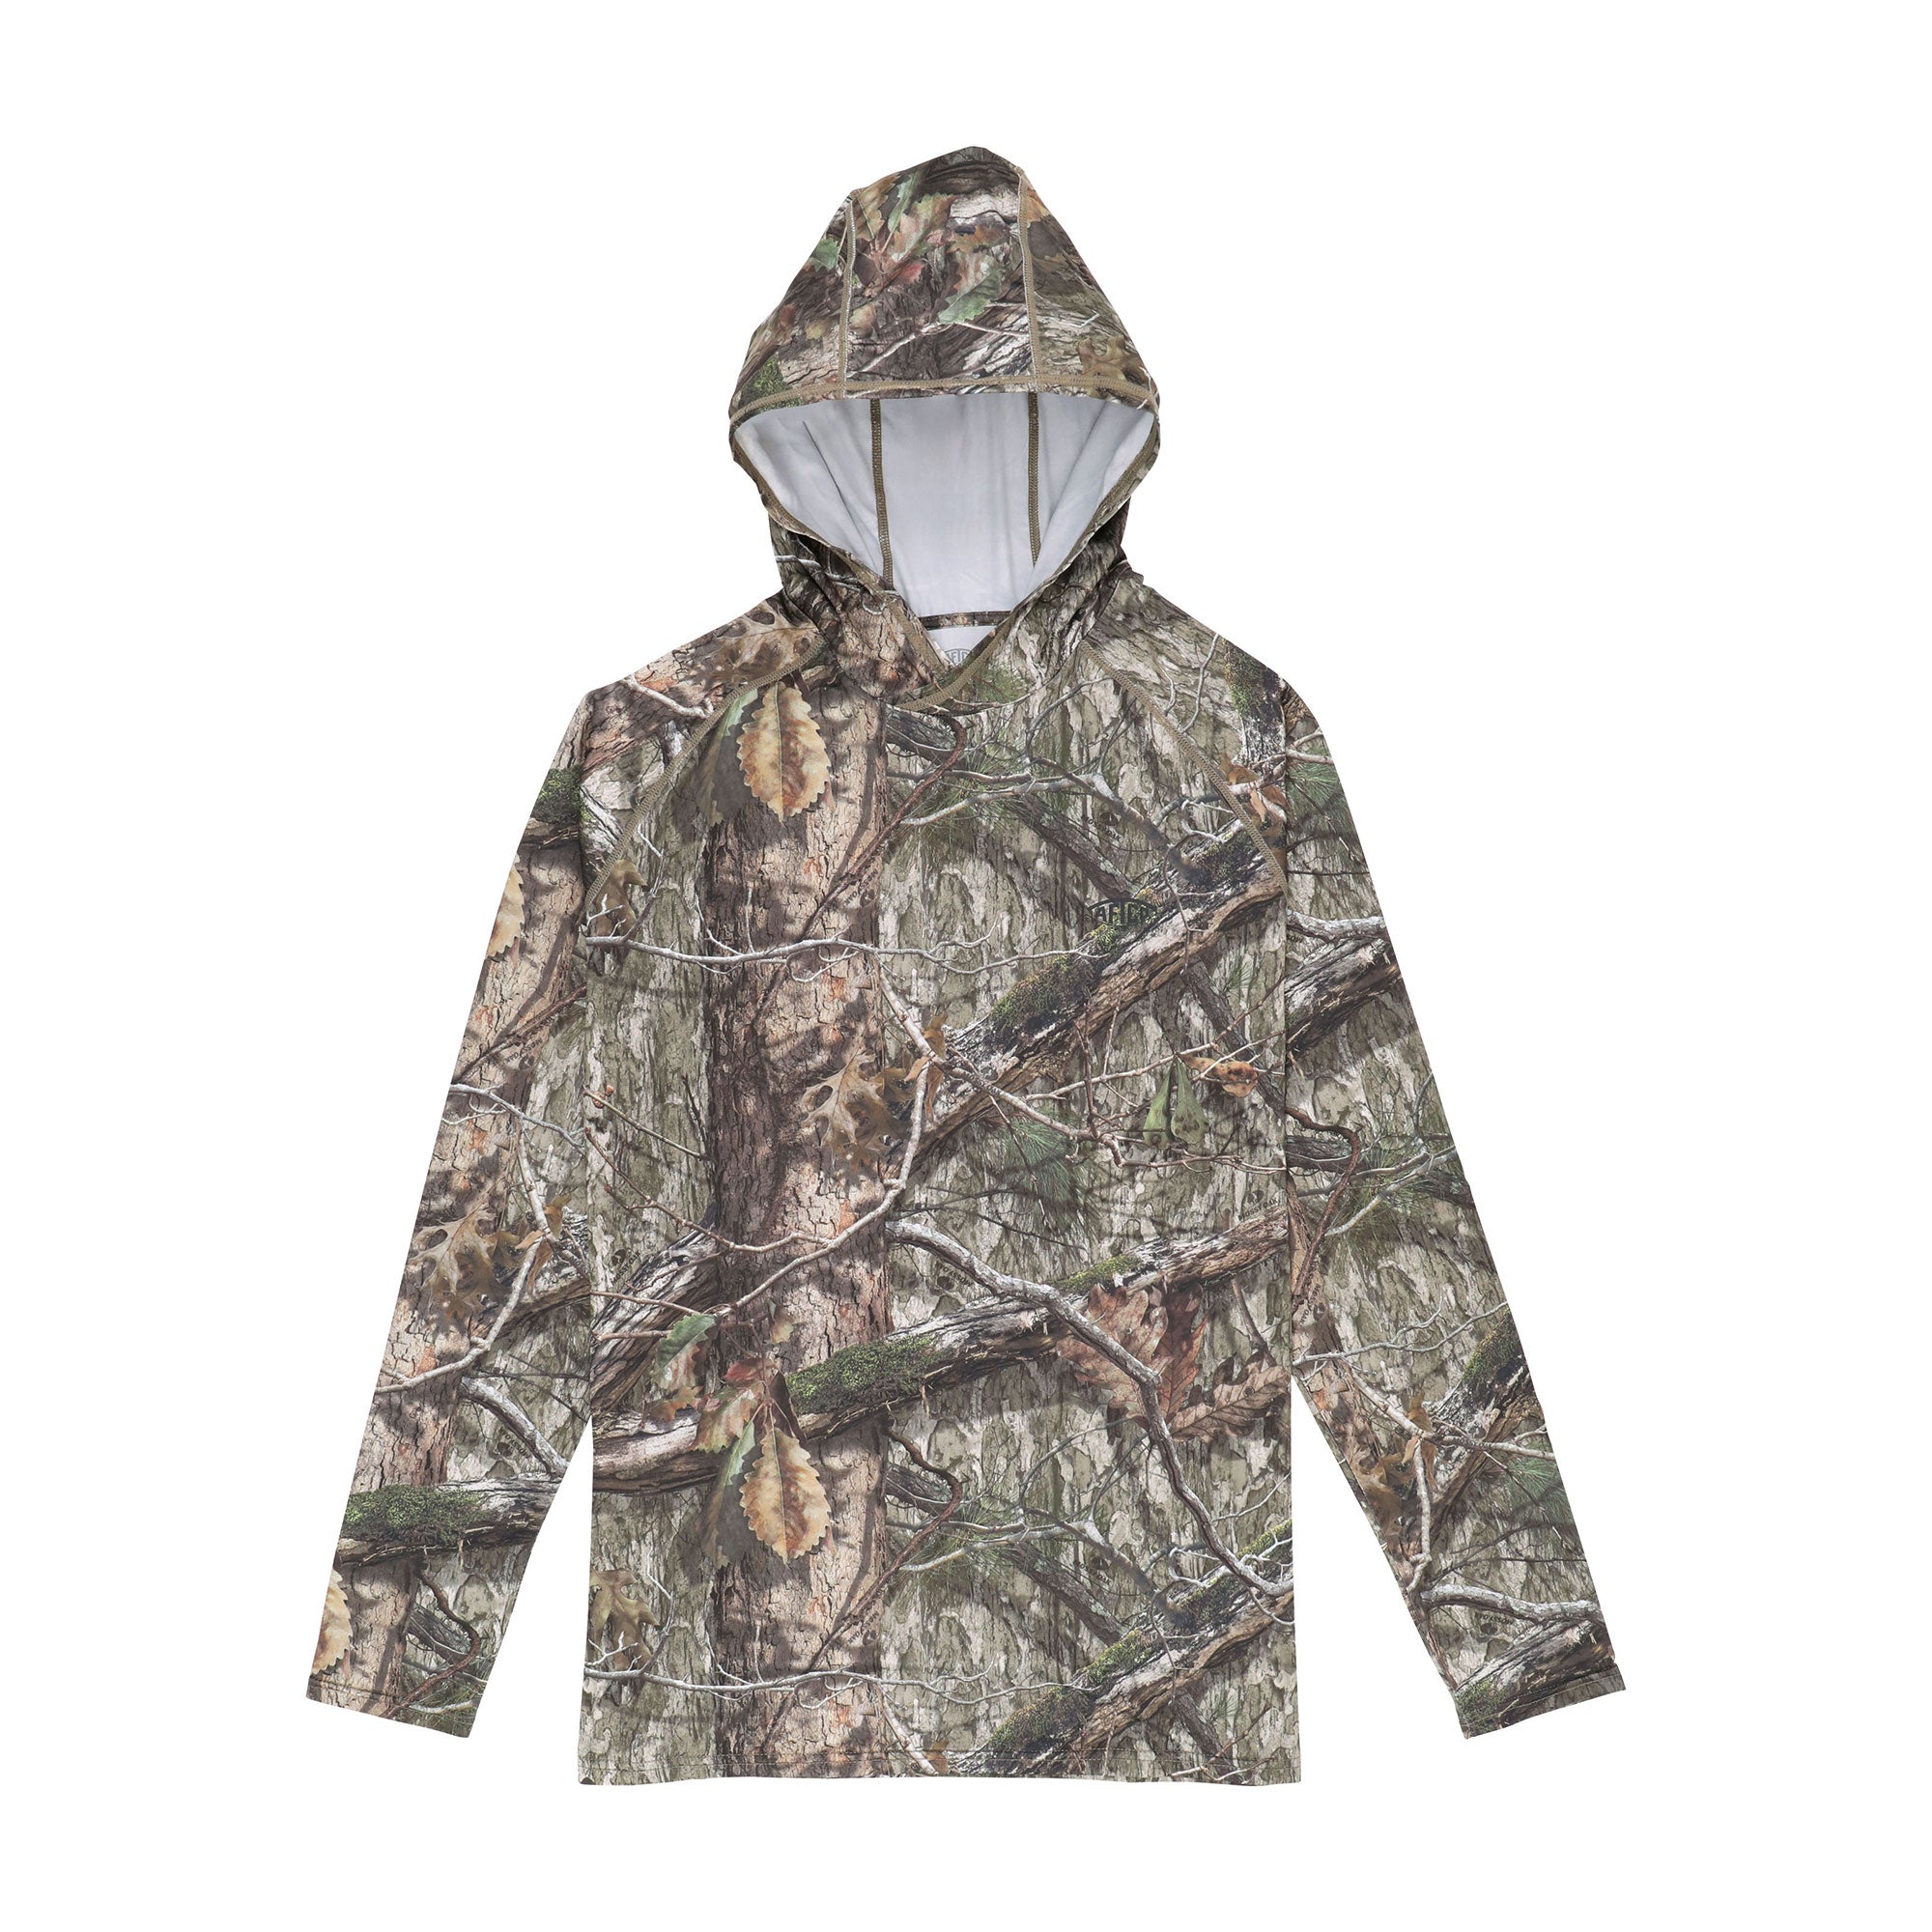 AFTCO Mossy Oak Camo Performance Hood - Country DNA - M